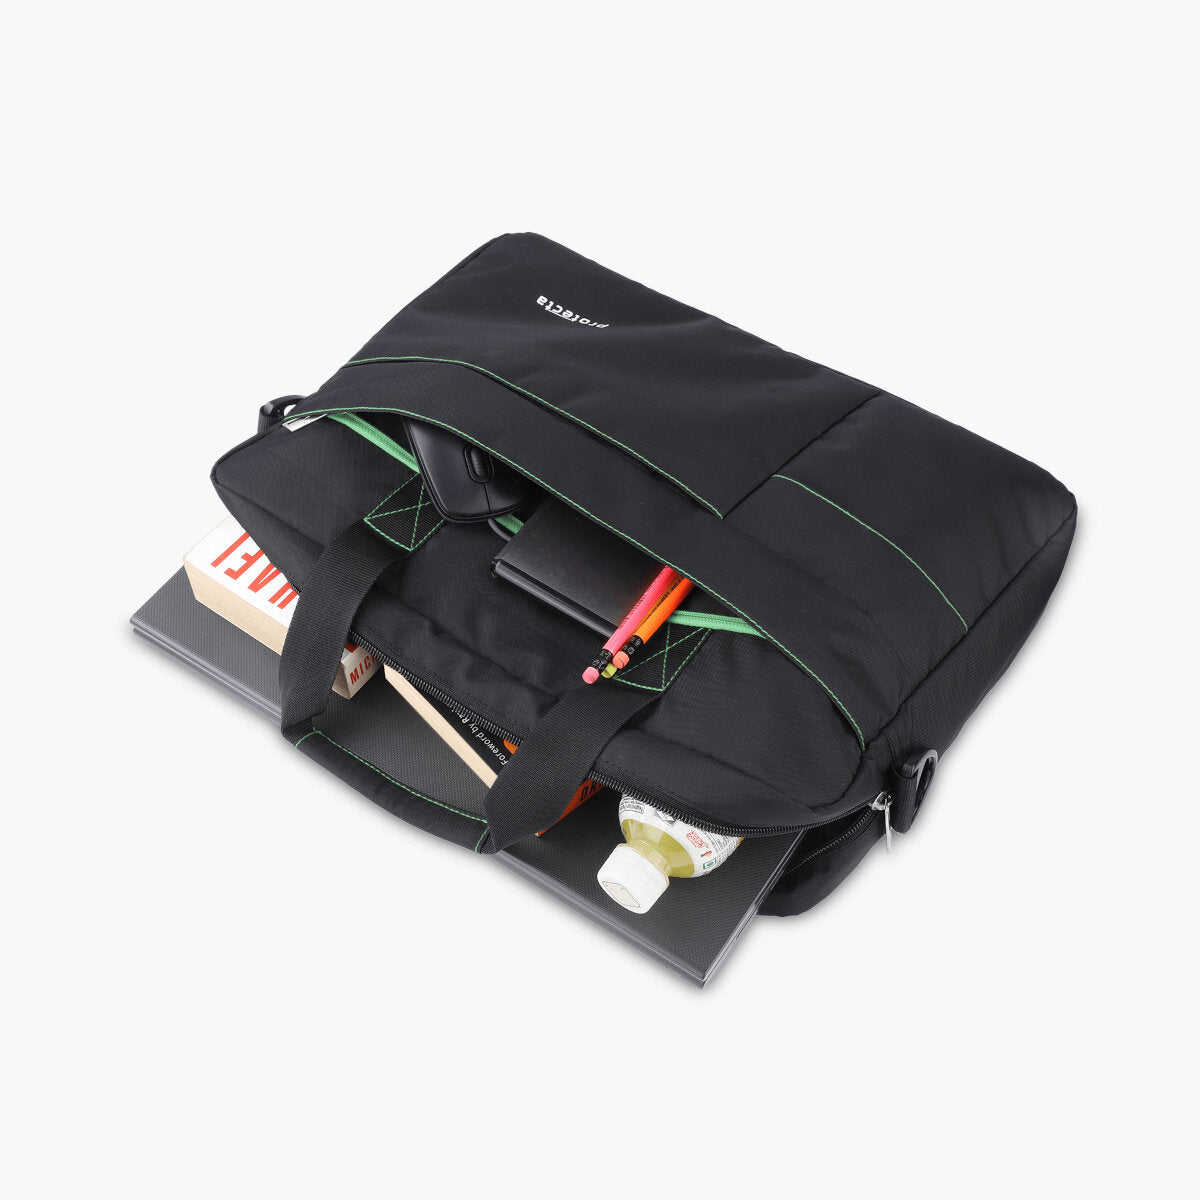 Black-Green | Protecta Pace Laptop Office Bag-1